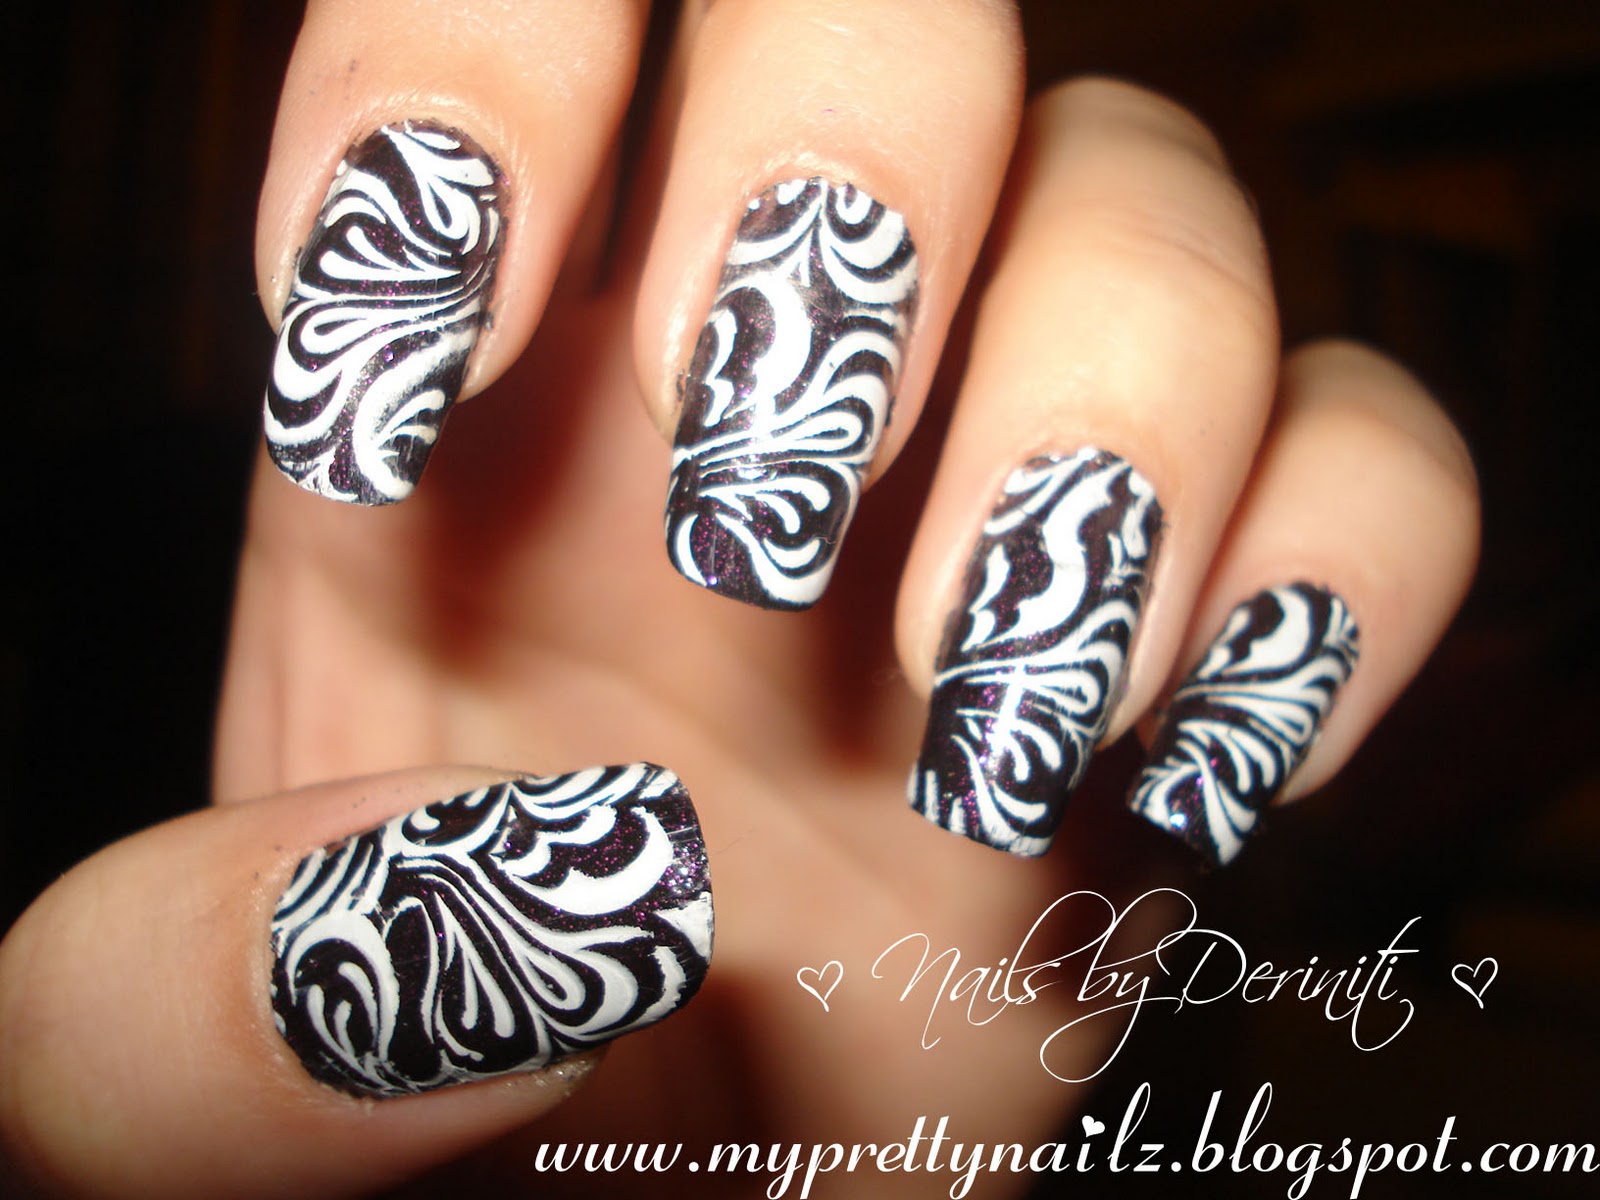 1. Simple Black and White Nail Art Design - wide 5